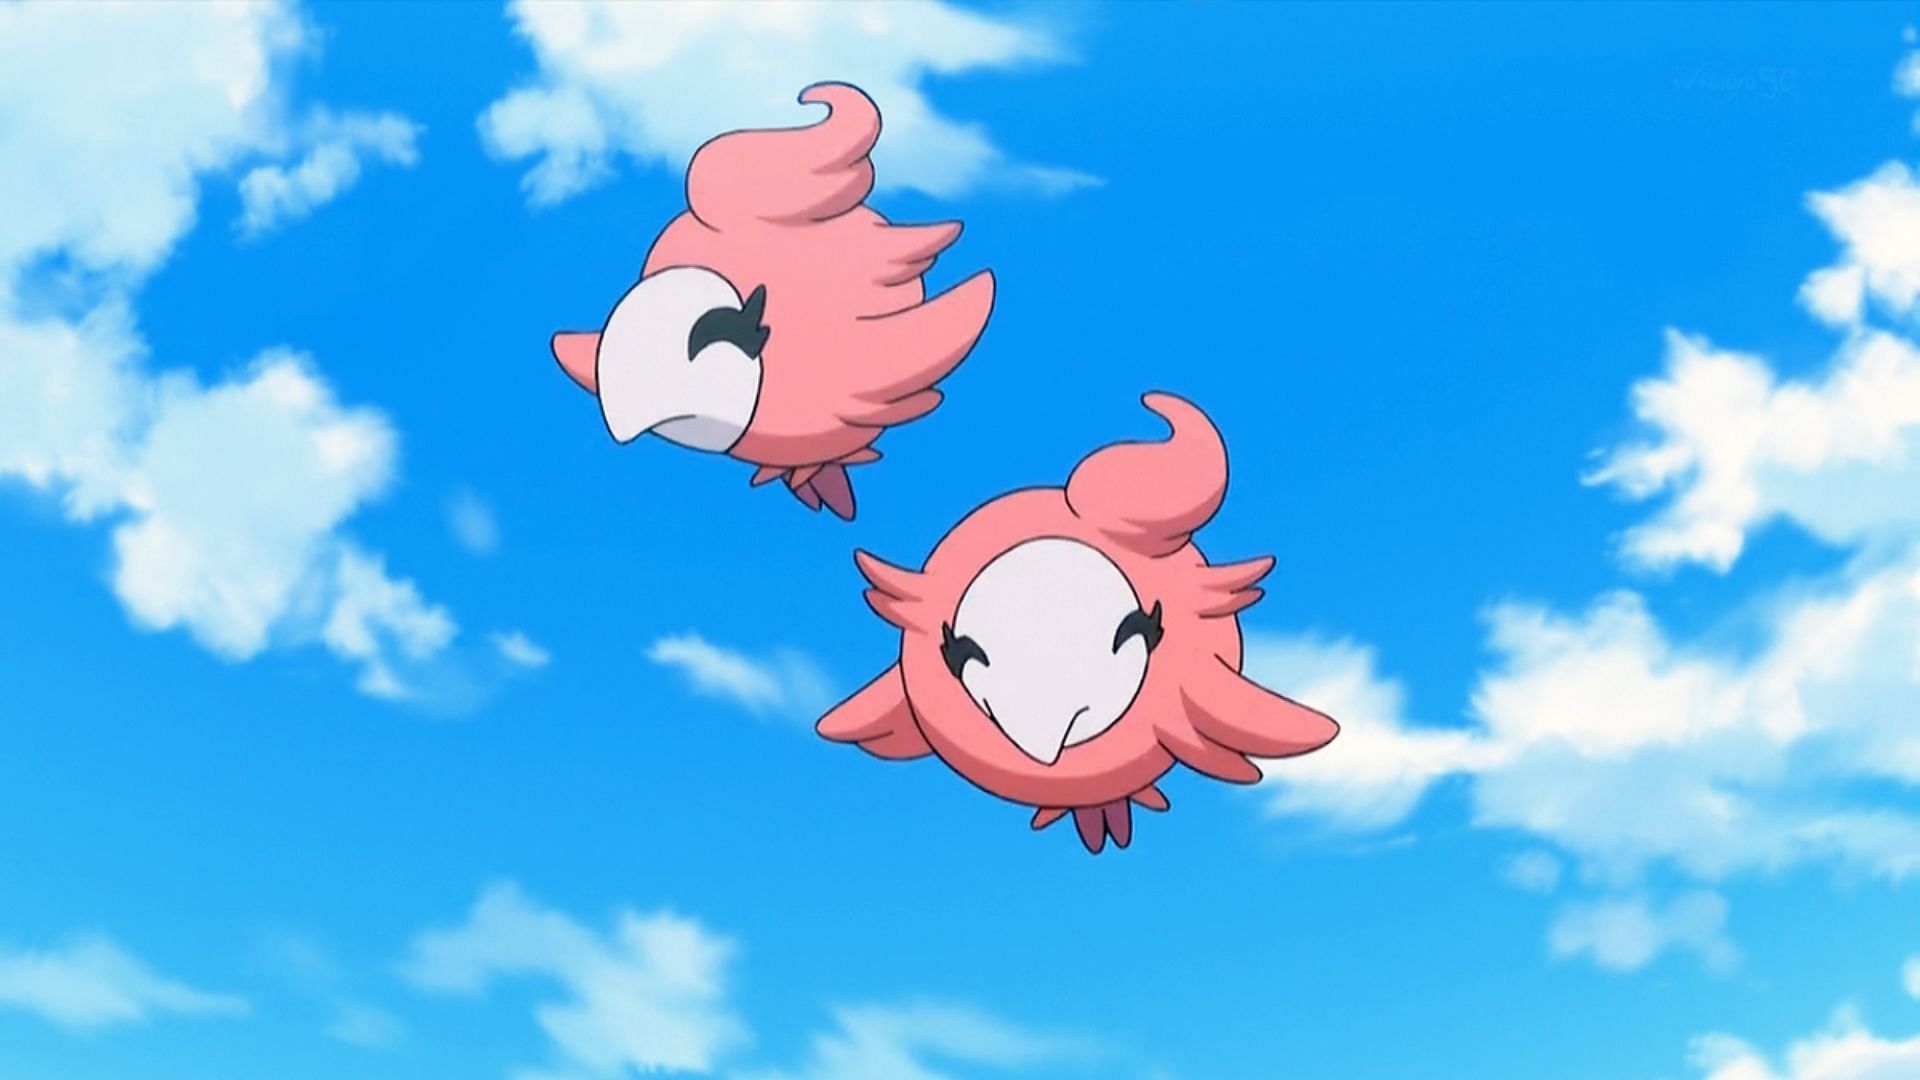 Spritzee as seen in the anime (Image via The Pokemon Company)